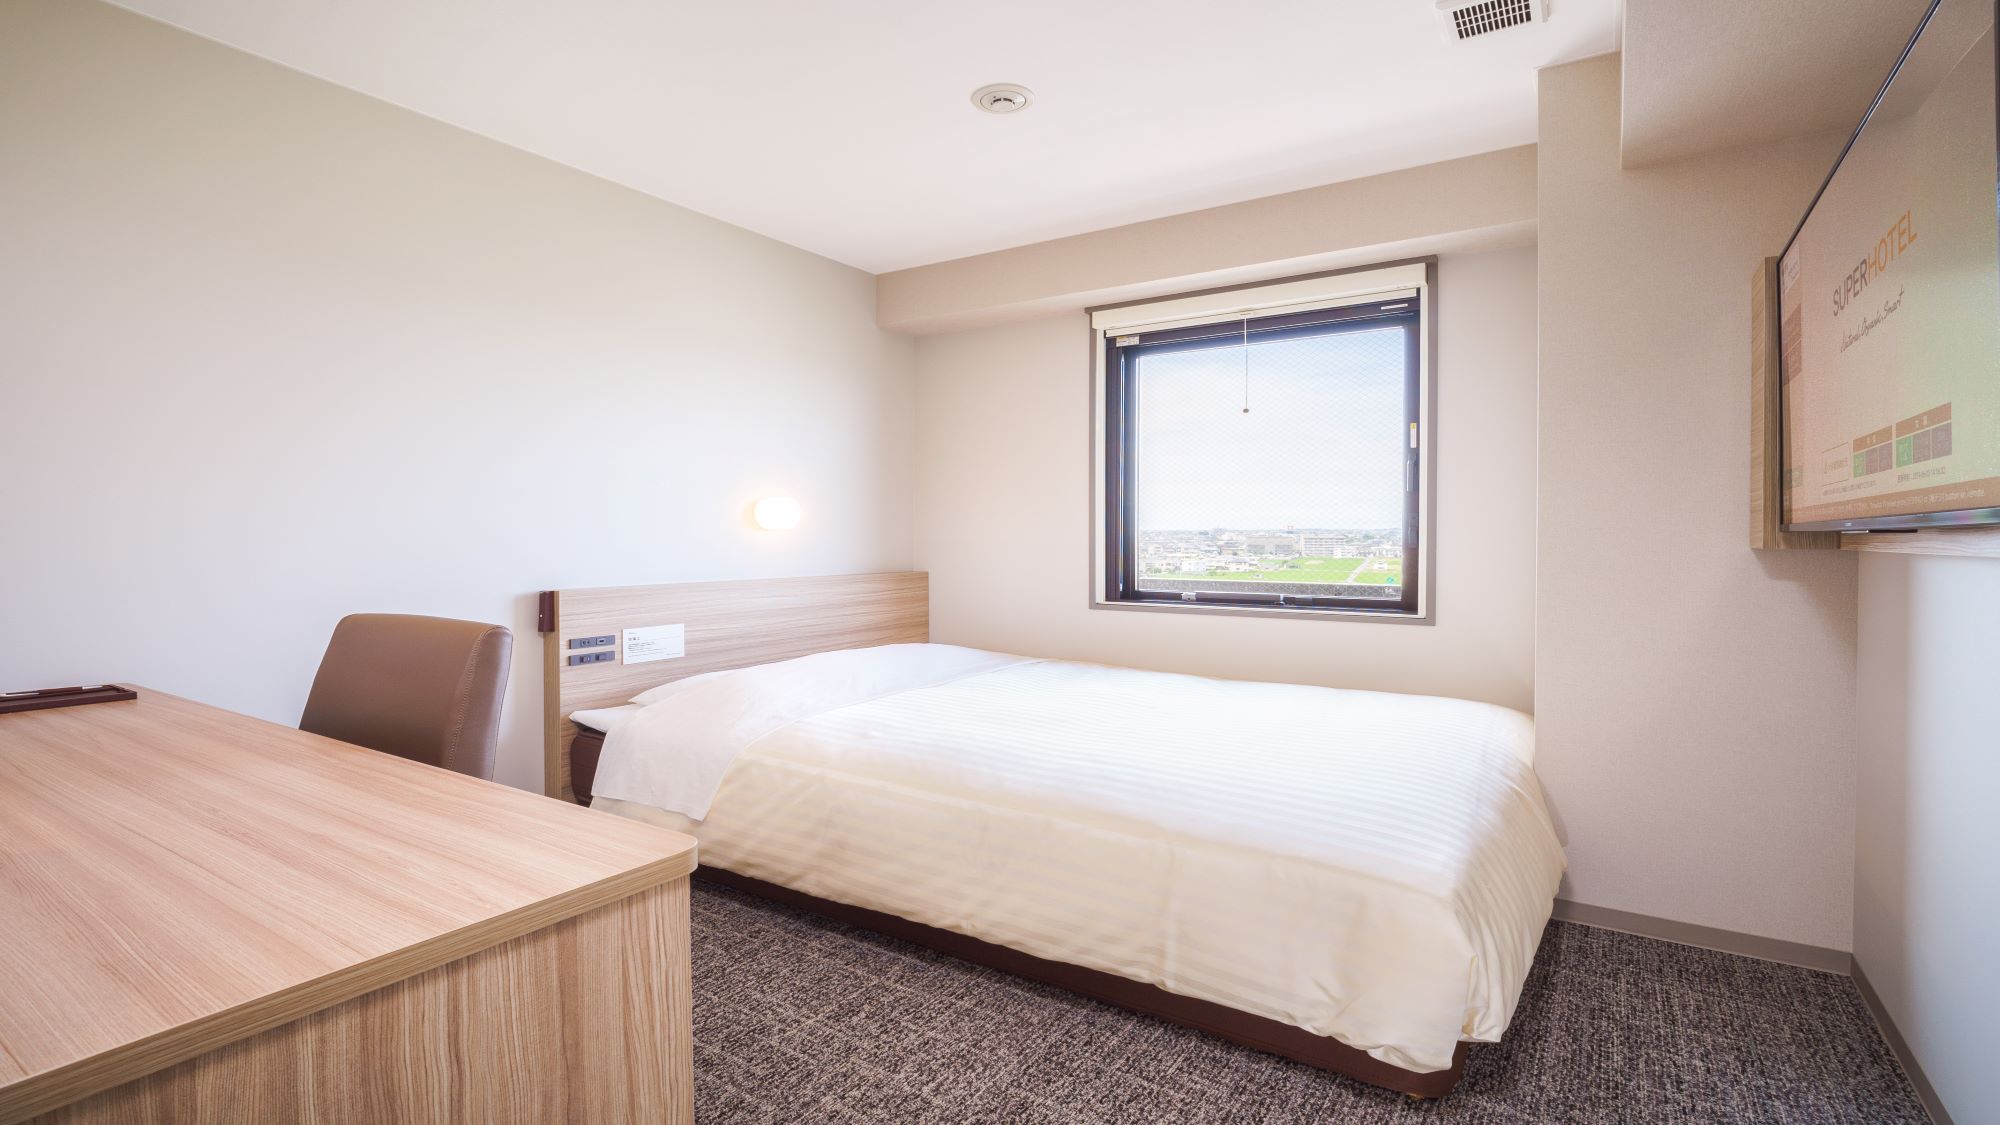 Super Hotel Anan Tomioka Super Hotel Anan Tomioka is a popular choice amongst travelers in Anan, whether exploring or just passing through. The property offers guests a range of services and amenities designed to provide comf